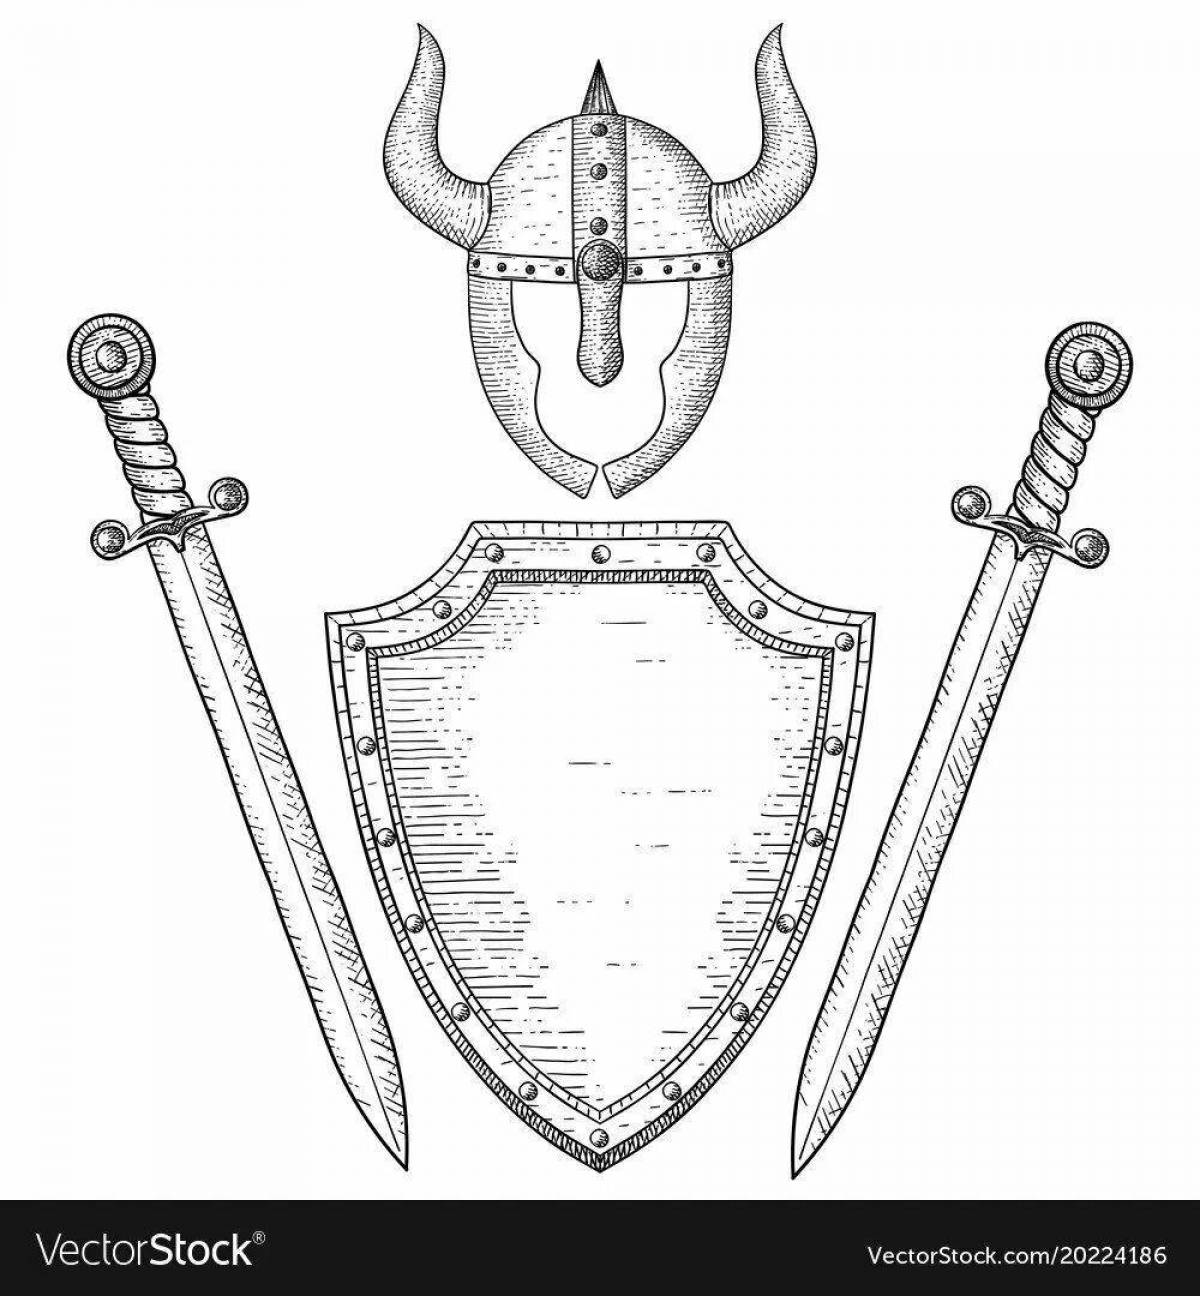 Children's shield coloring page for kids